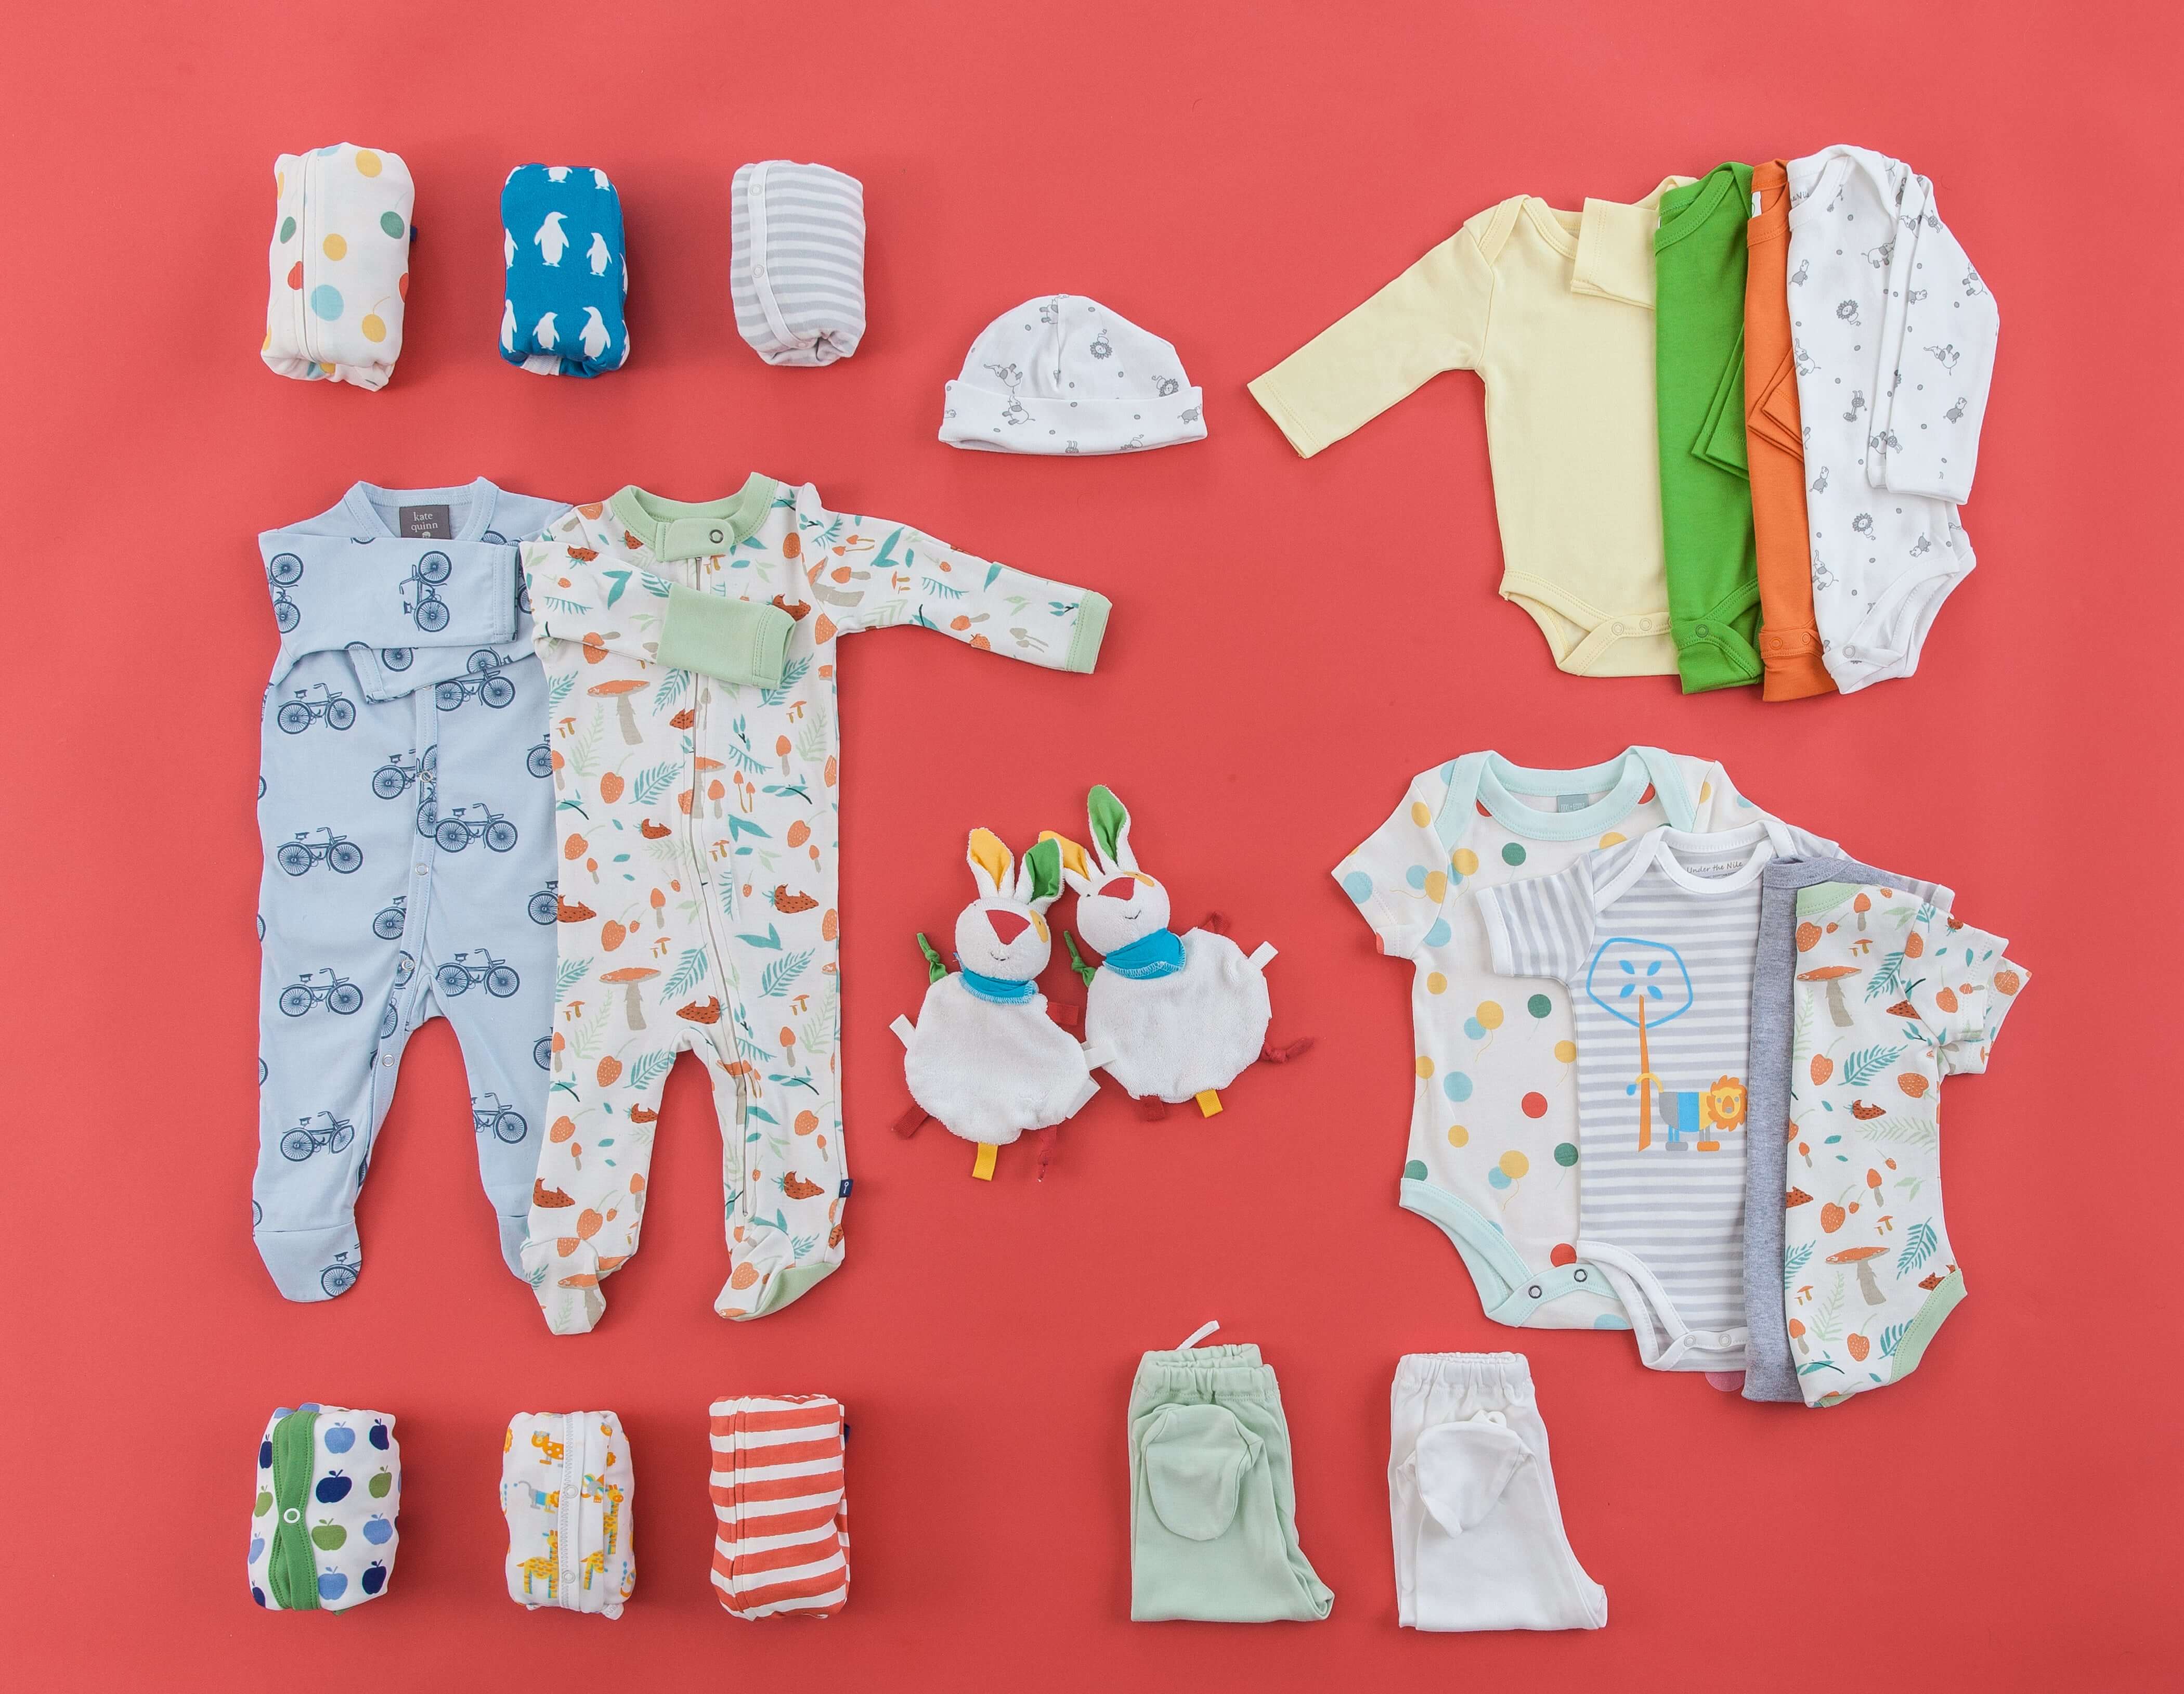 Playful baby clothing set with bodysuits, footies, hats, toys, and pants on a vibrant red background